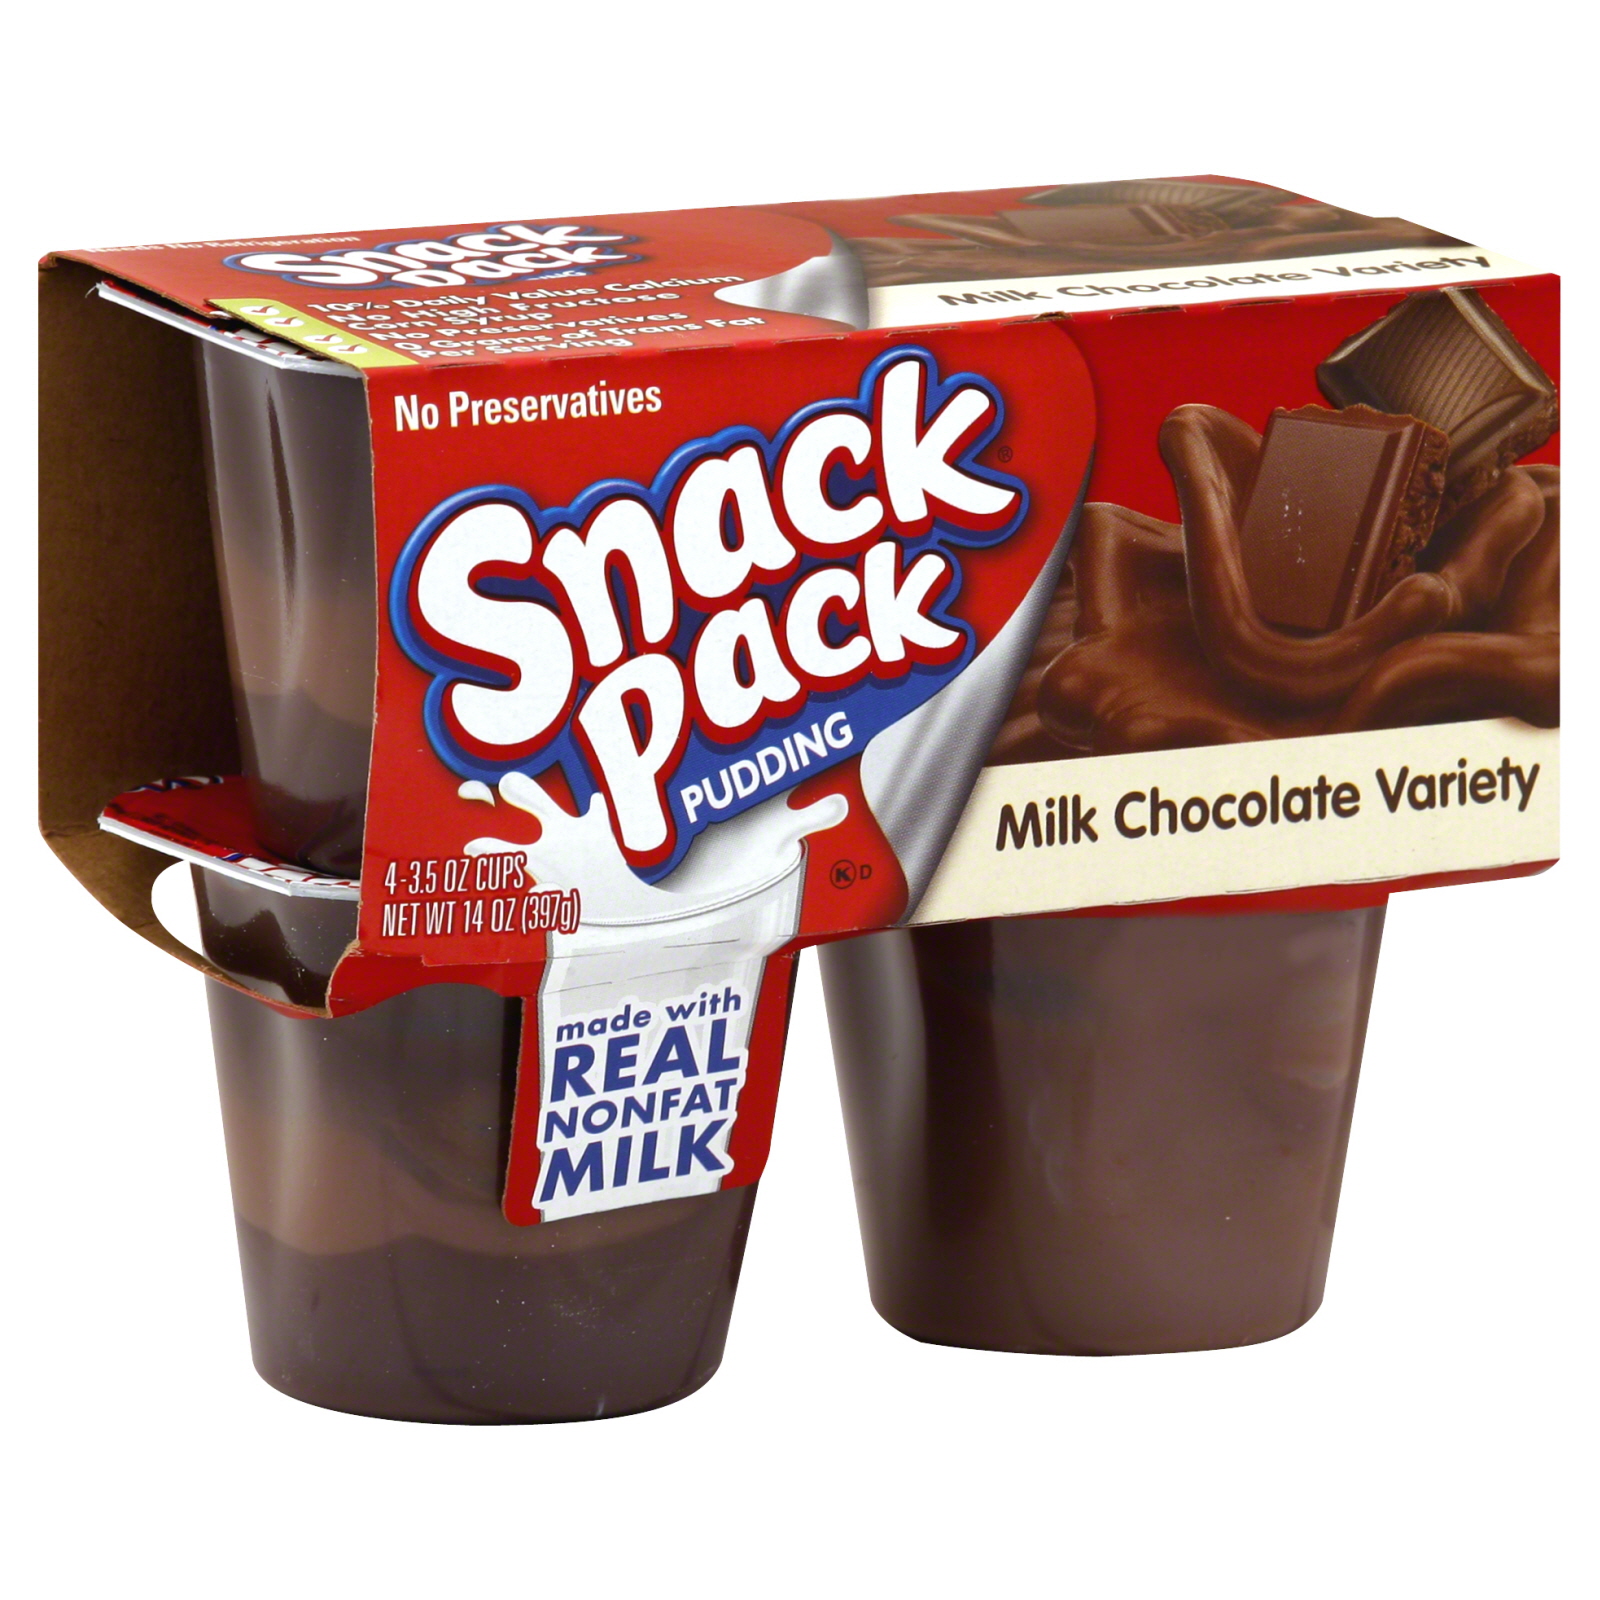 Hunt's Snack Pack Pudding, Milk Chocolate Variety, 4 - 3.5 oz cups [14 oz (397 g)]